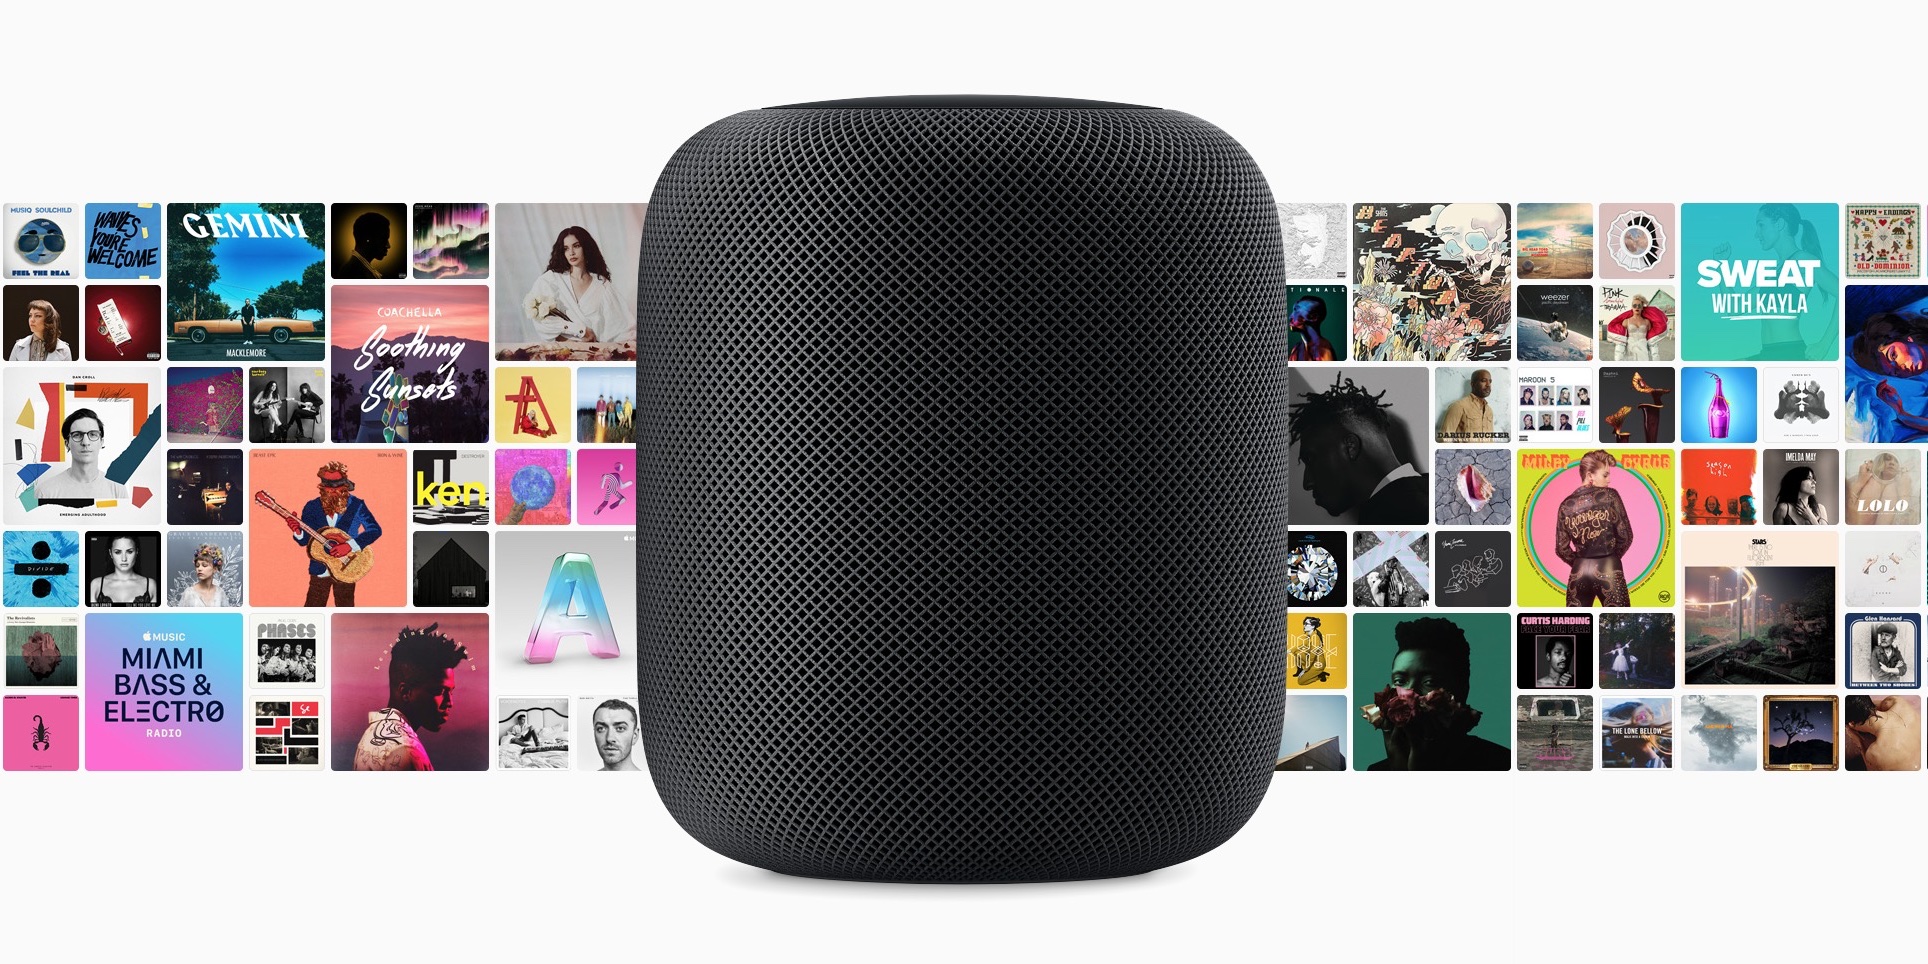 HomePod can play purchased iTunes music 